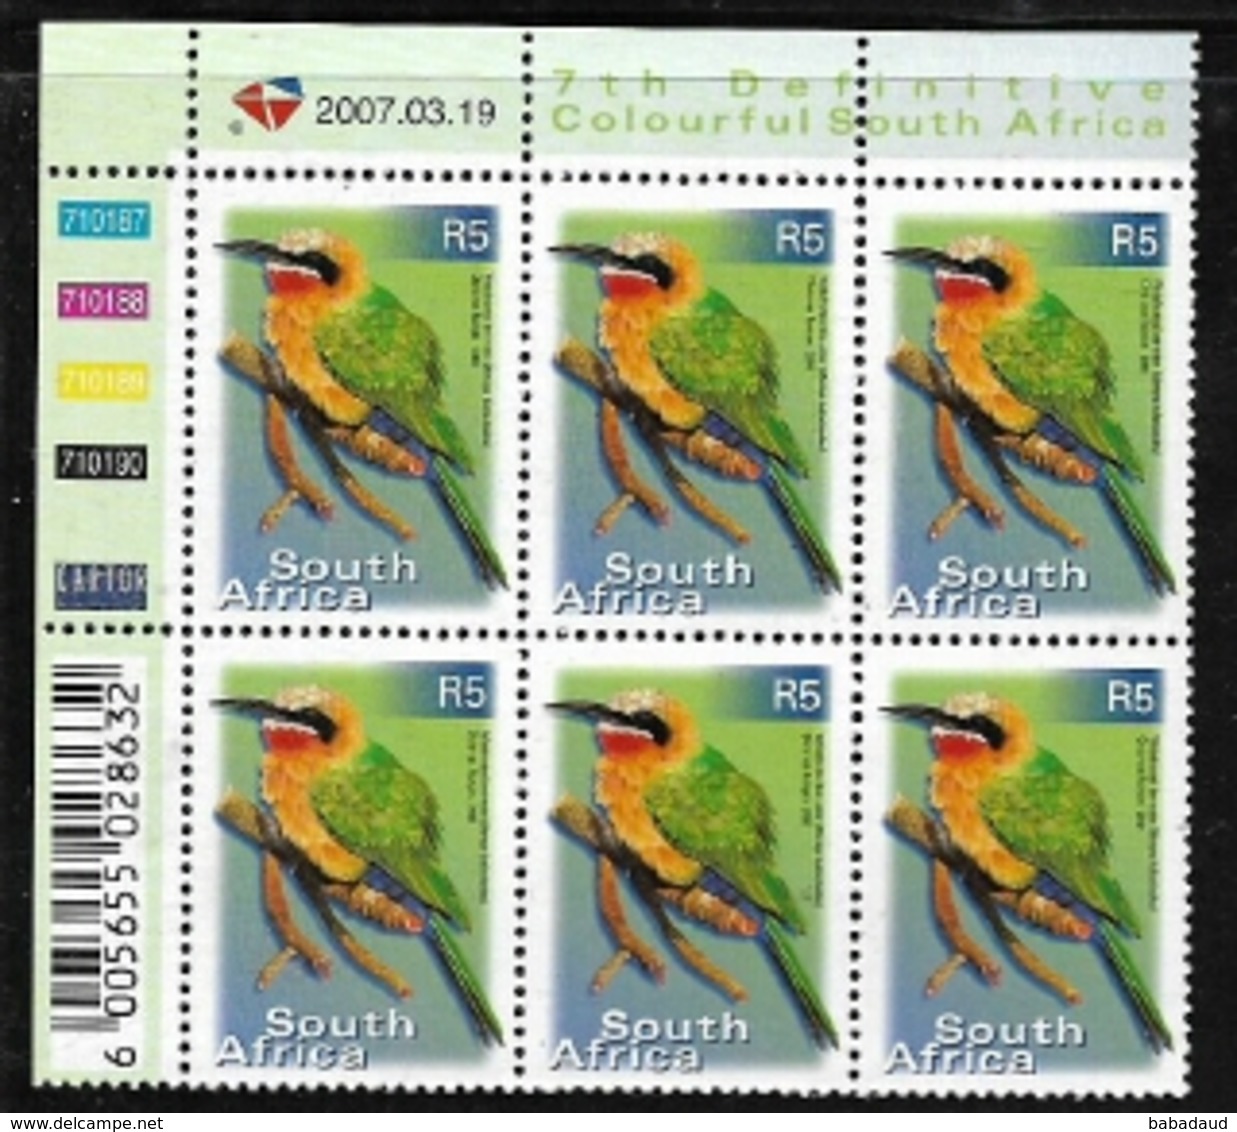 South Africa, 2007, R5 Control Block Of 6, MNH ** - Unused Stamps